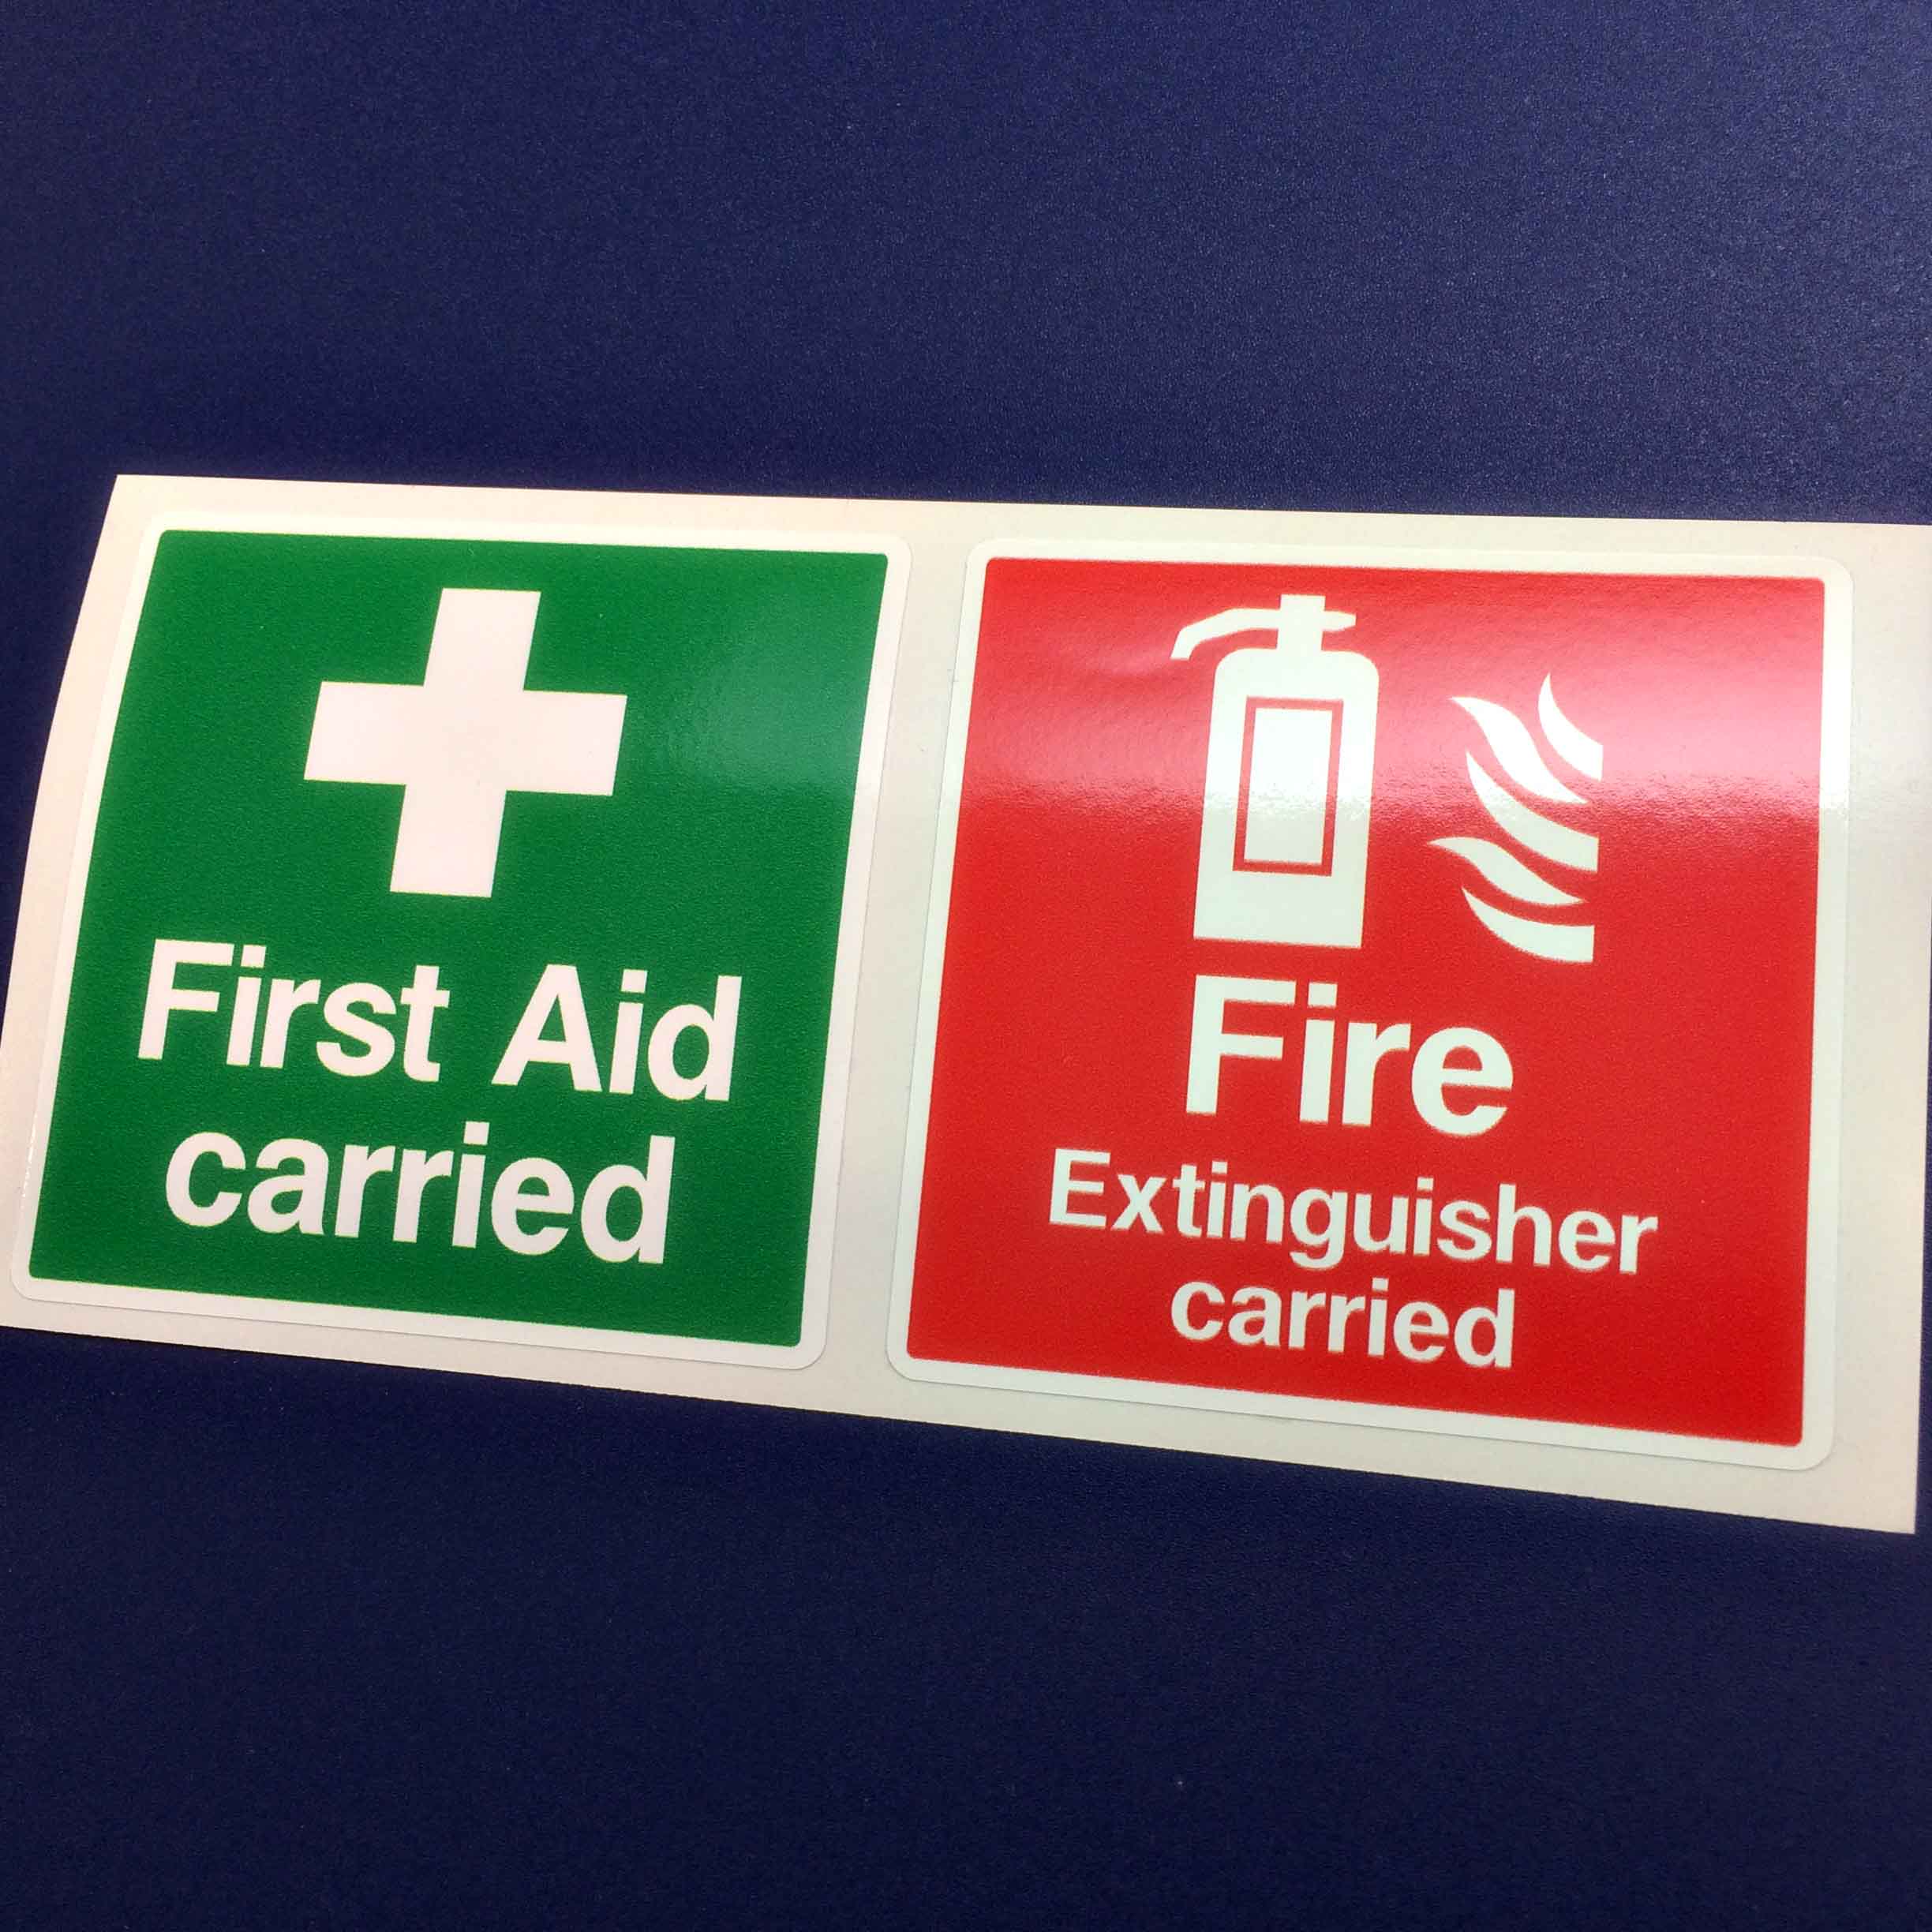 FIRST AID CARRIED FIRE EXTINGUISHER STICKERS. First Aid carried in white letters and a white cross on a green square. Fire Extinguisher carried in white letters and a white flame and fire extinguisher on a red square.